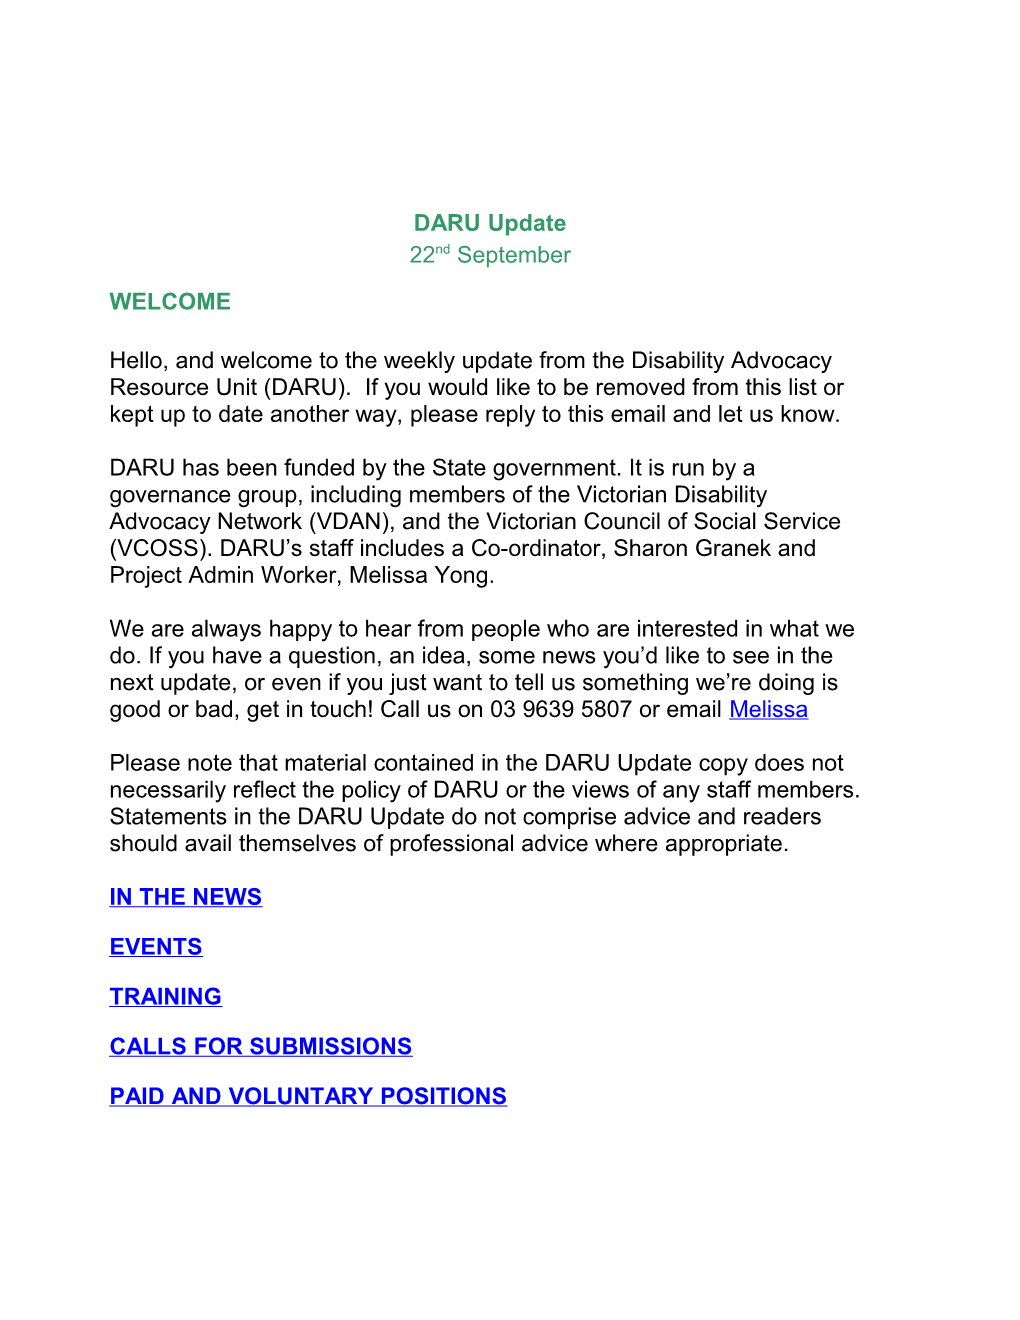 Hello, and Welcome to the Weekly Update from the Disability Advocacy Resource Unit (DARU) s2